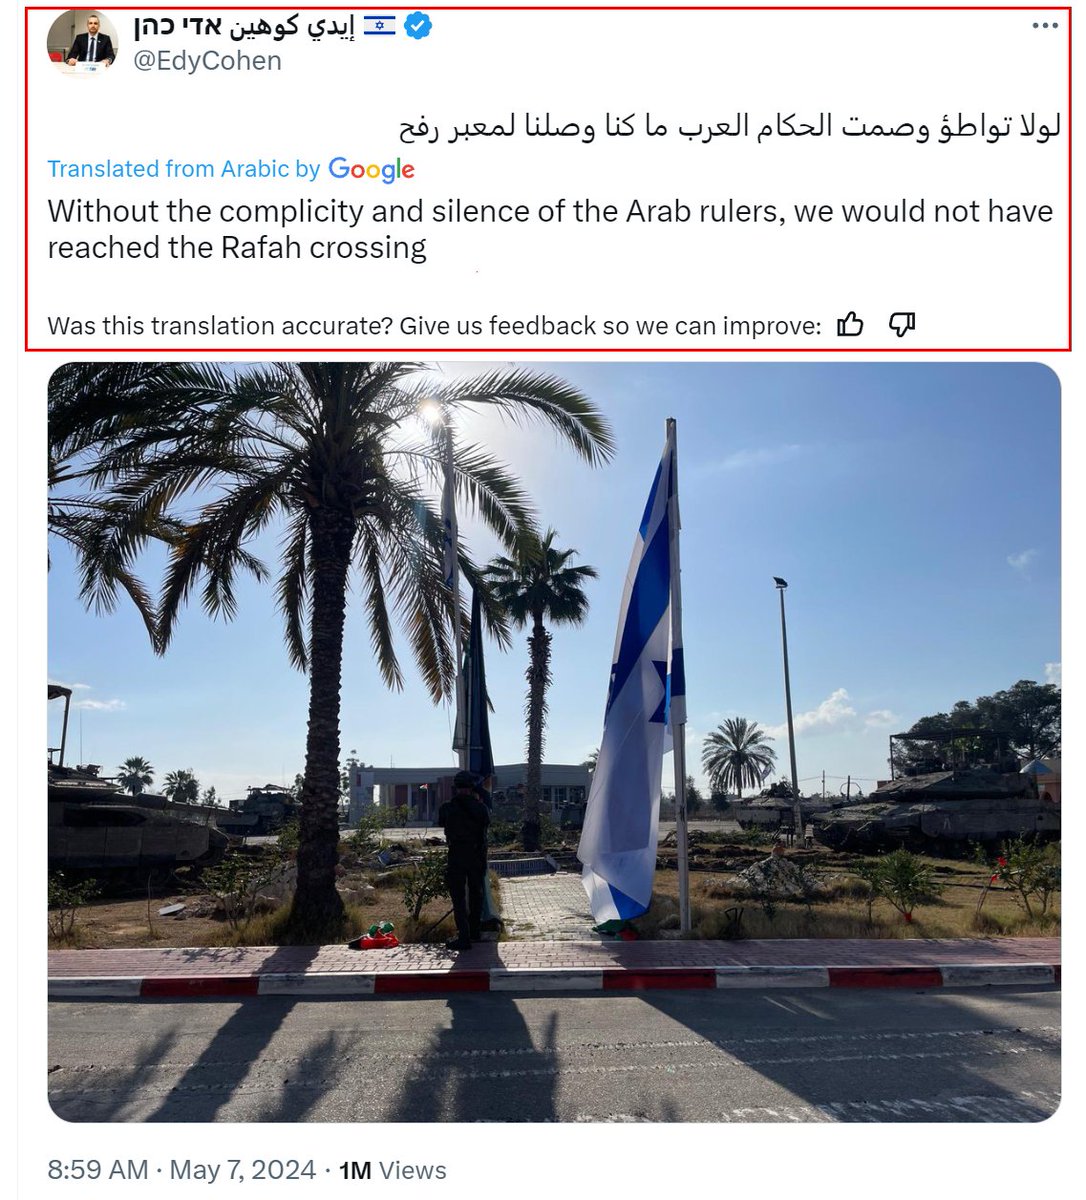 And he is right. Muslim world is in such a shameless state 'Without the complicity and silence of the Arab rulers, we would not have reached the Rafah crossing'